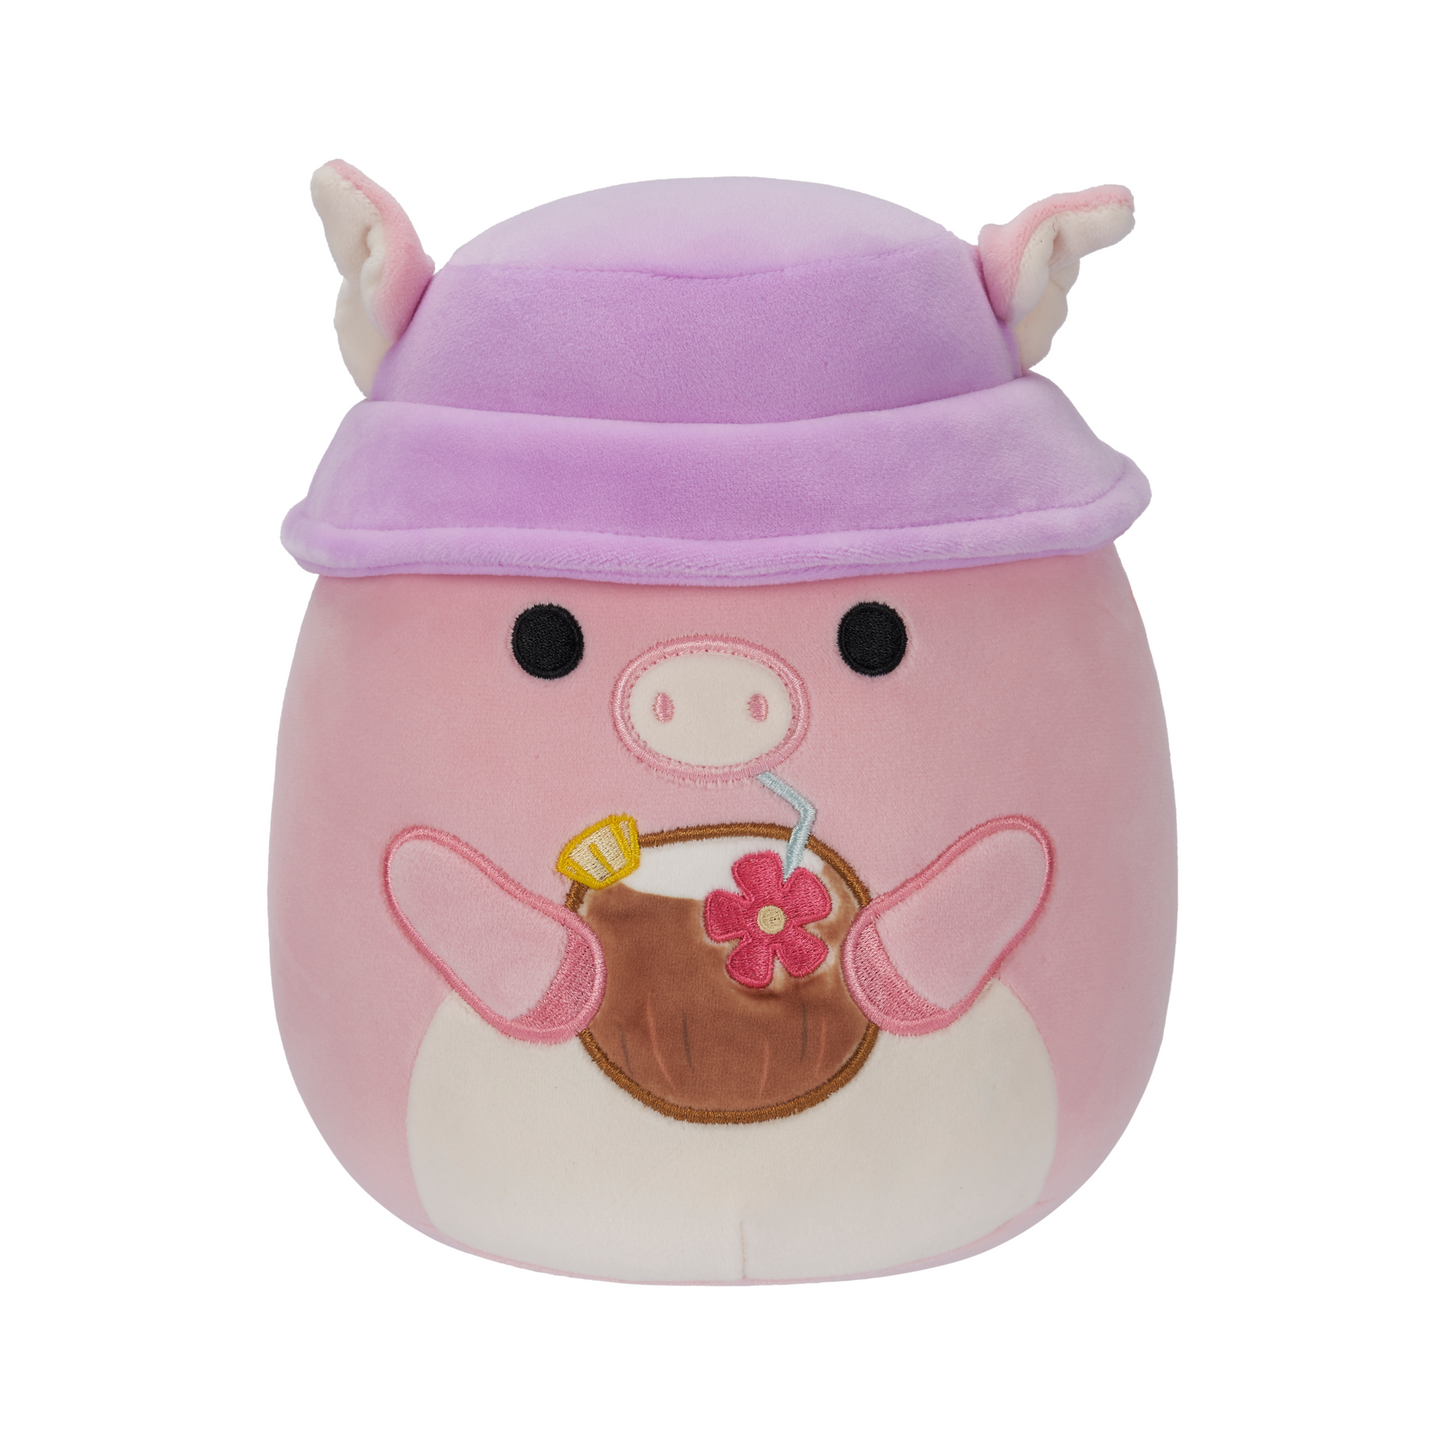 Peter The Pink Pig 7.5" Squishmallows Plush